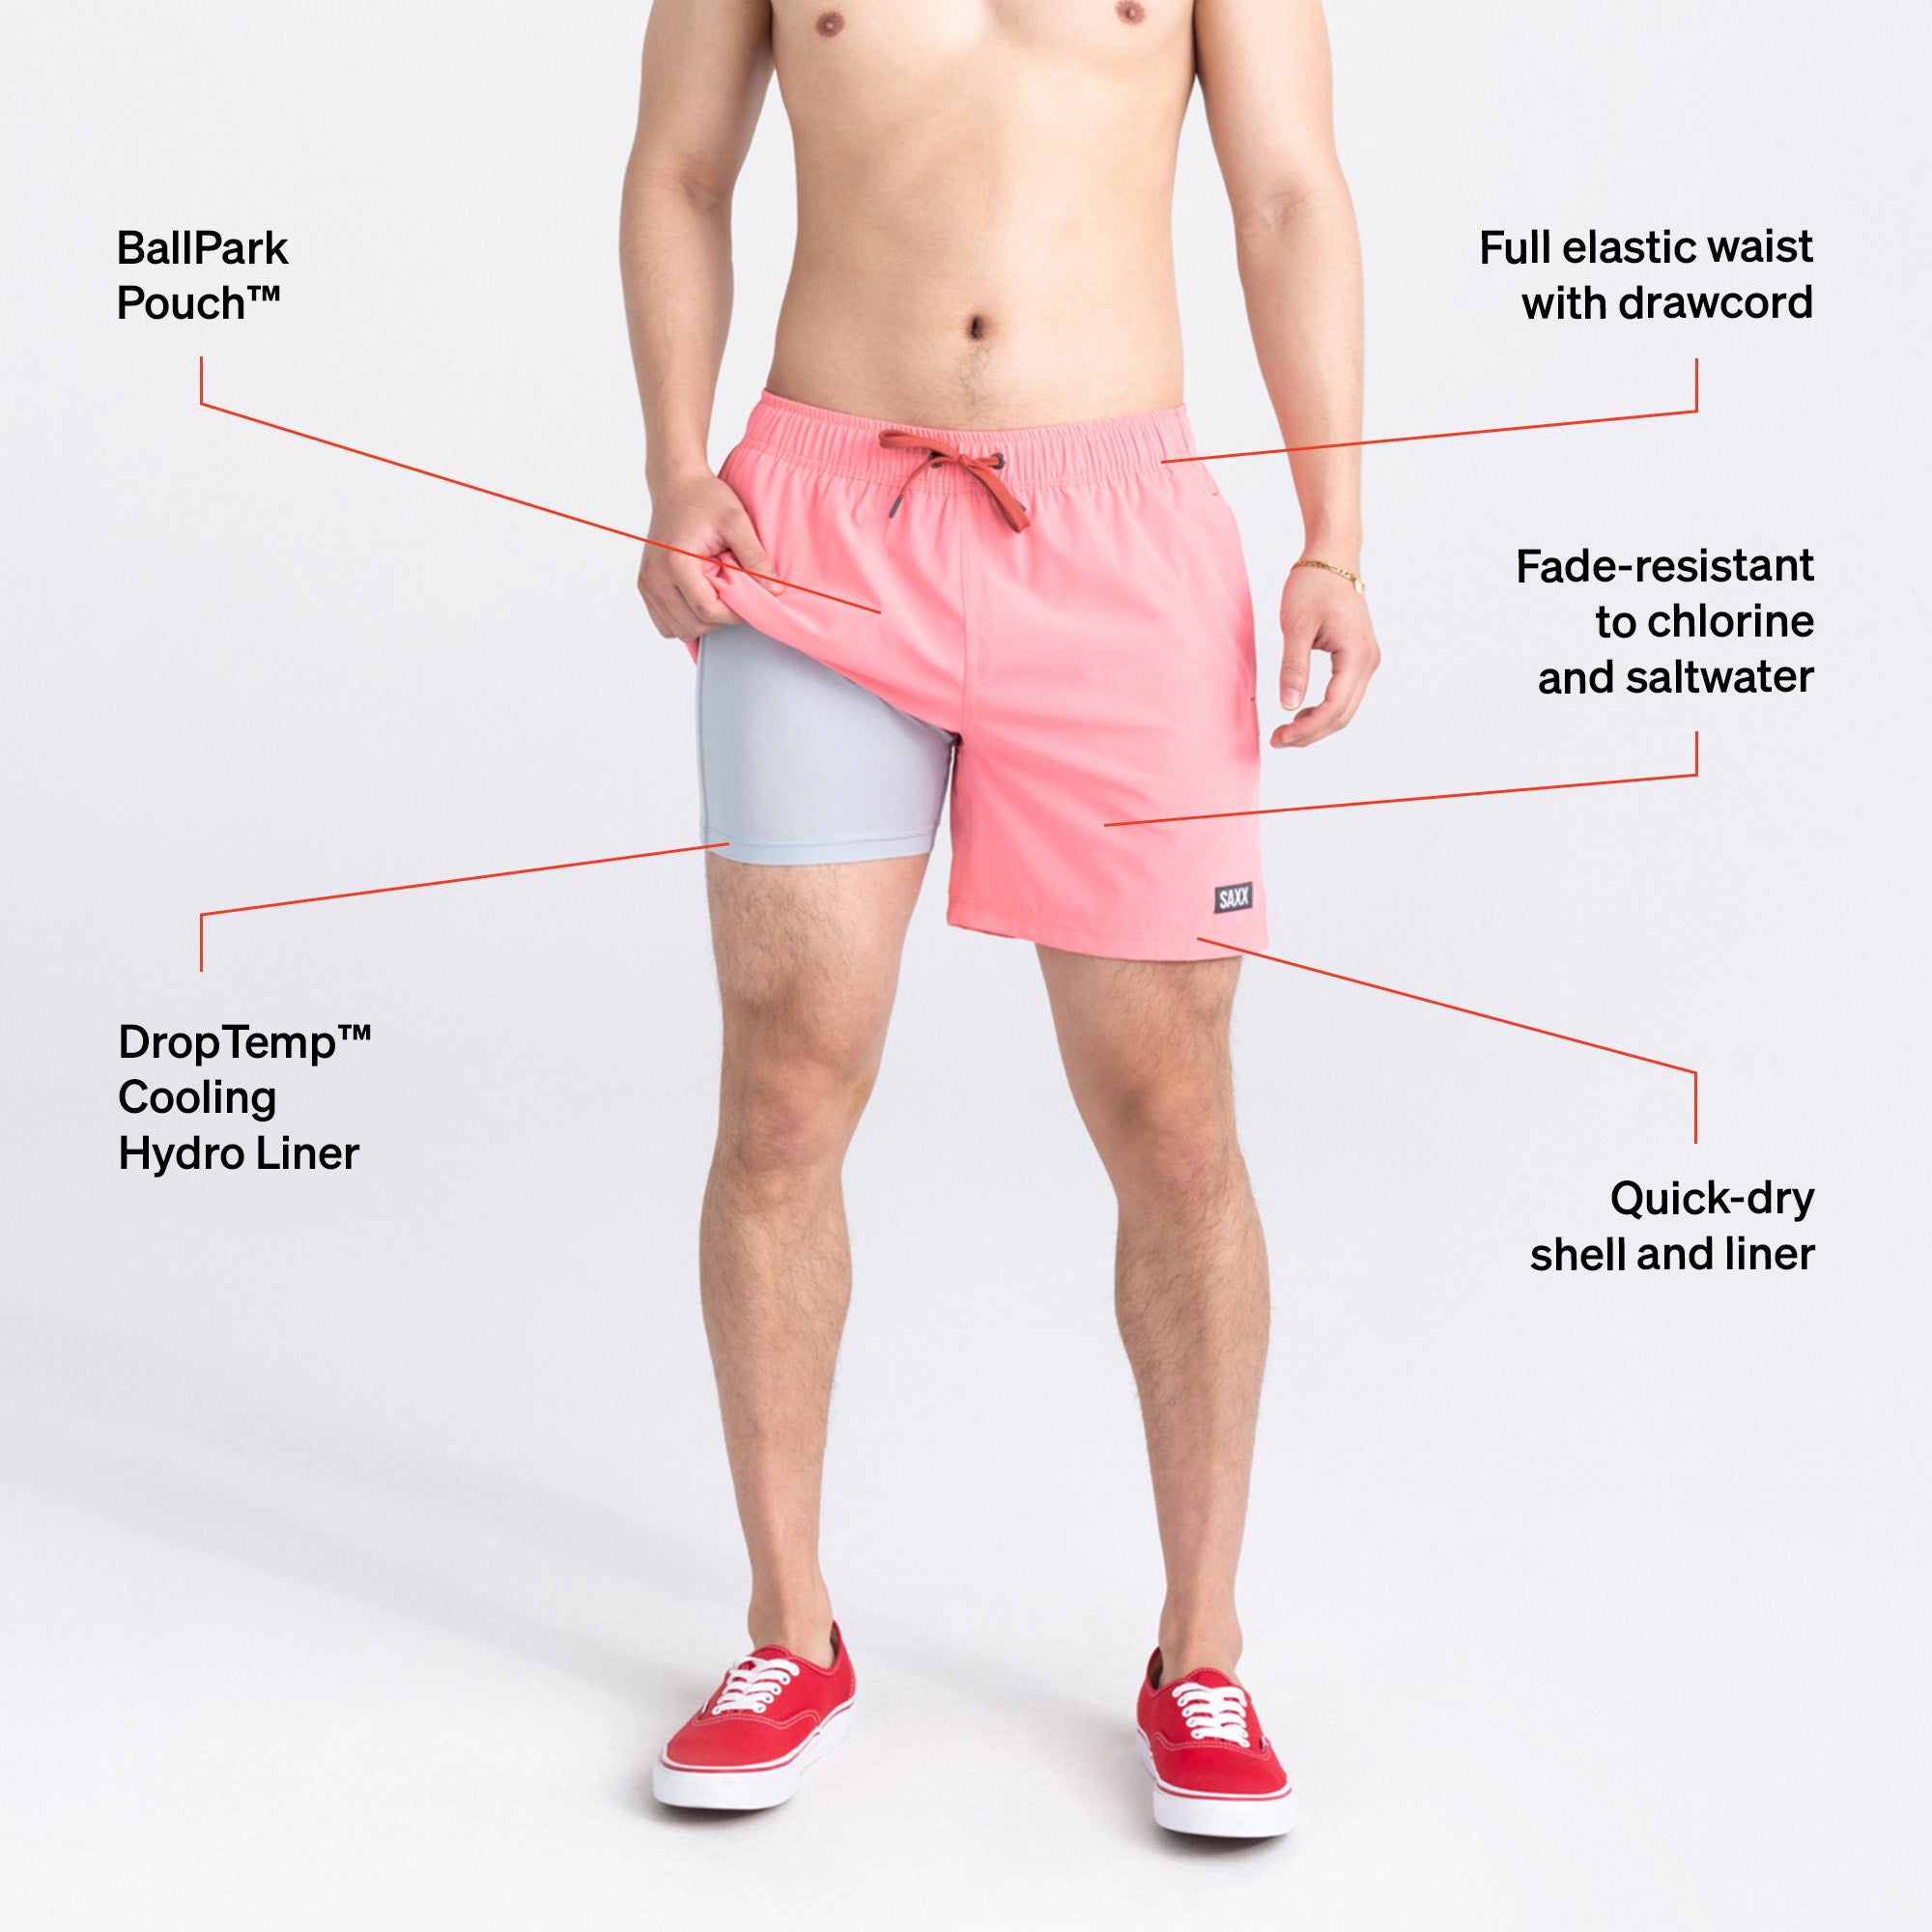 Man in pink swim shorts and red shoes lifting short leg to reveal liner